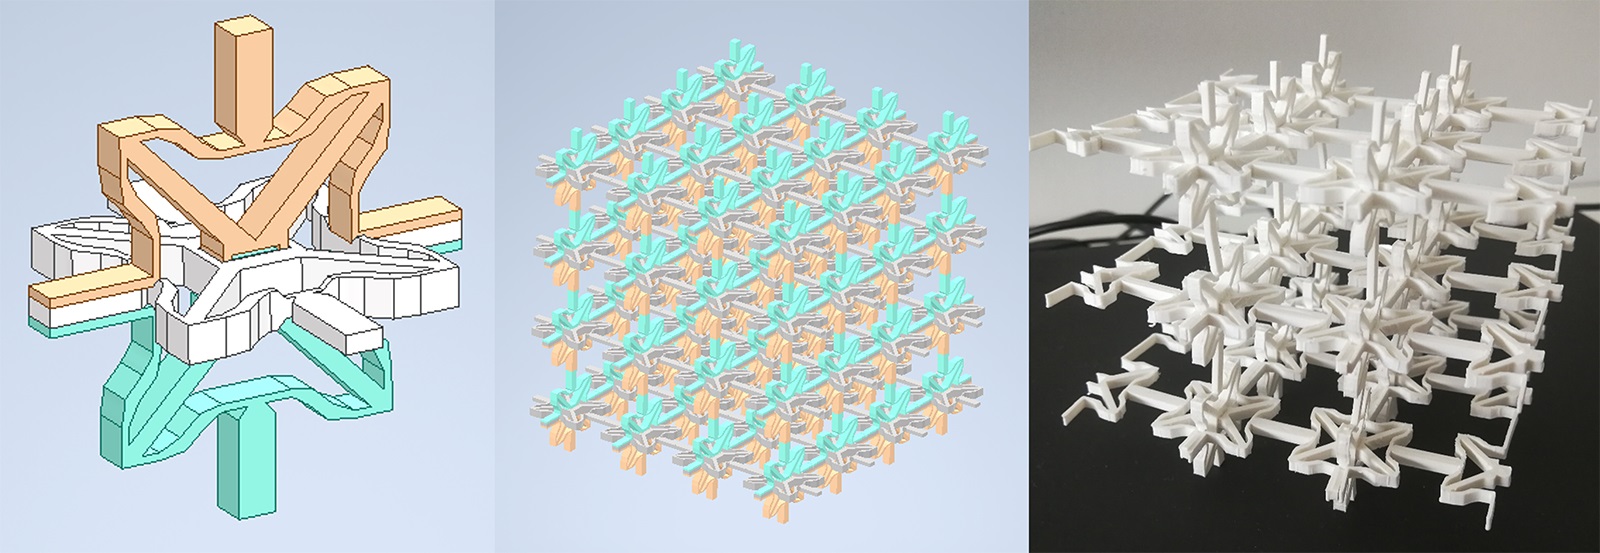 Left: Unit cell made of structural elements, Middle: Structure of the material from many cells, Right: 3D printed demonstrator.